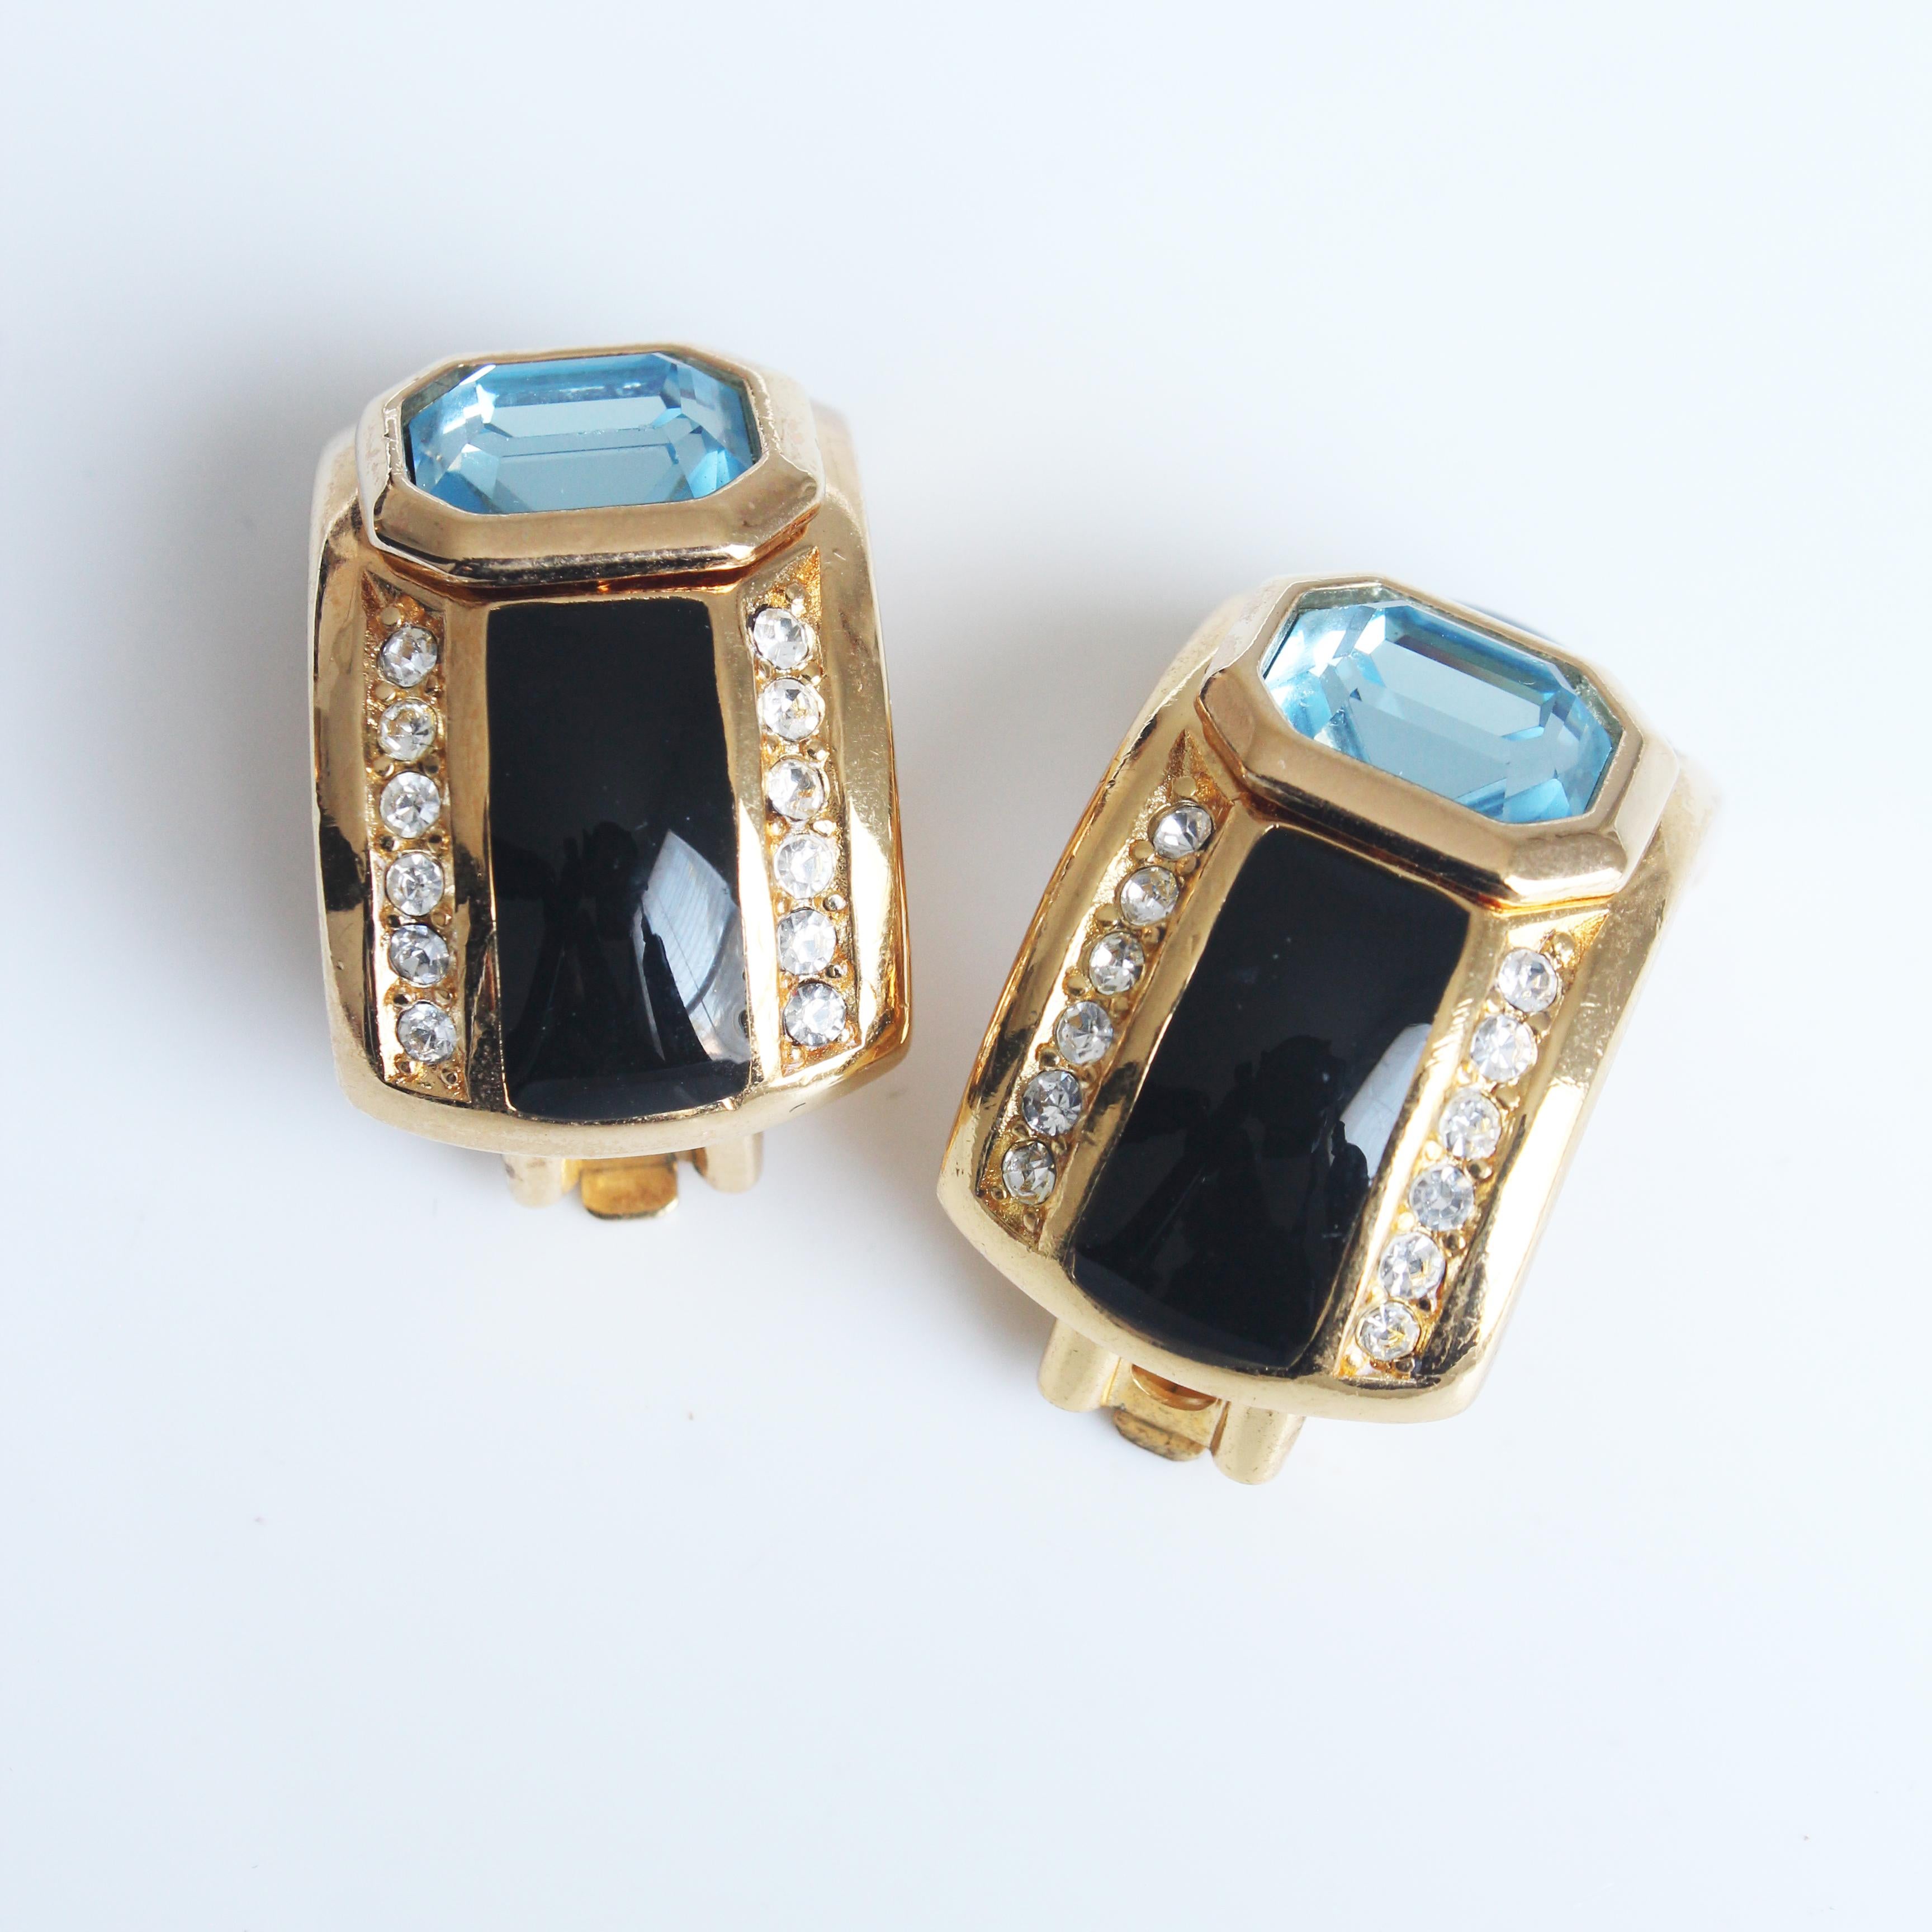 Christian Dior Art Deco Earrings with Faux Sapphire Topaz Crystals 1980s For Sale 6